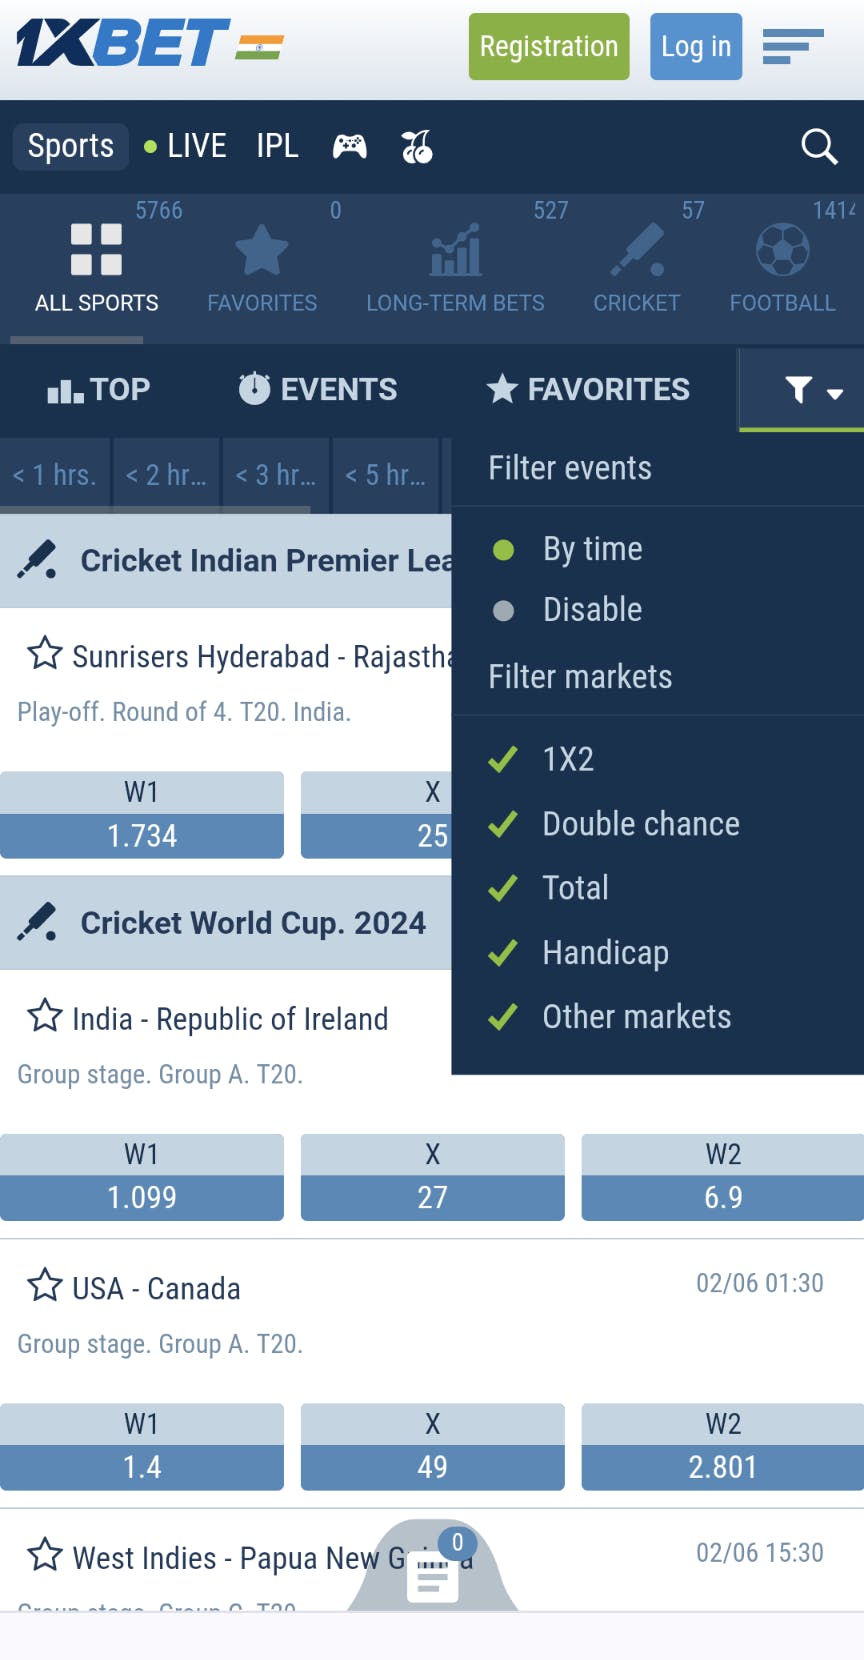 1xBet betting app filter with different markets.